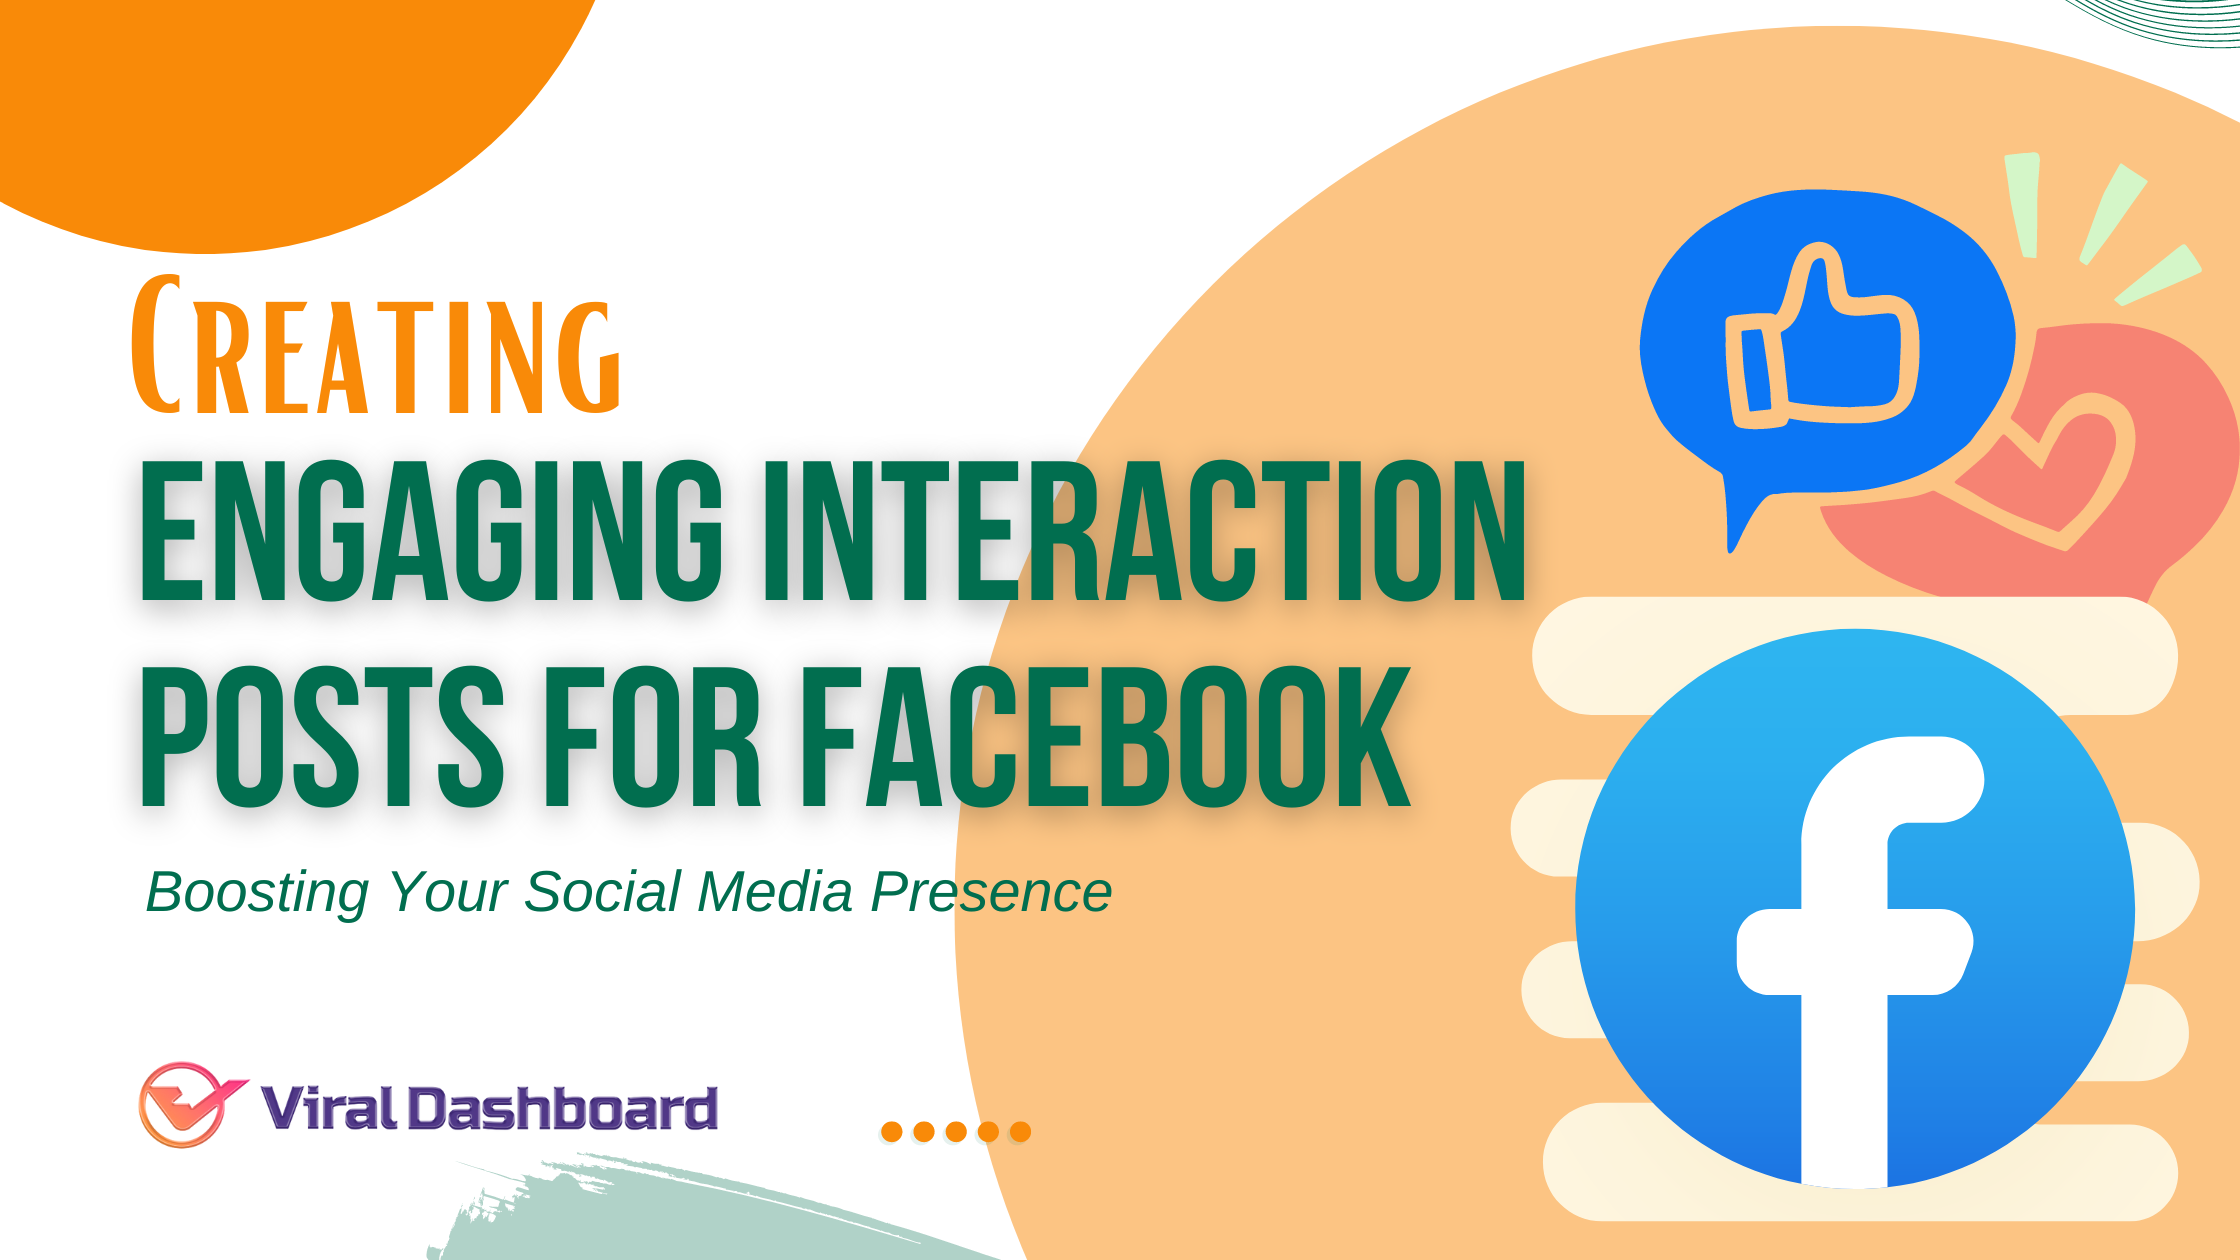 Creating Engaging Interaction Posts for Facebook: Boosting Your Social Media Presence